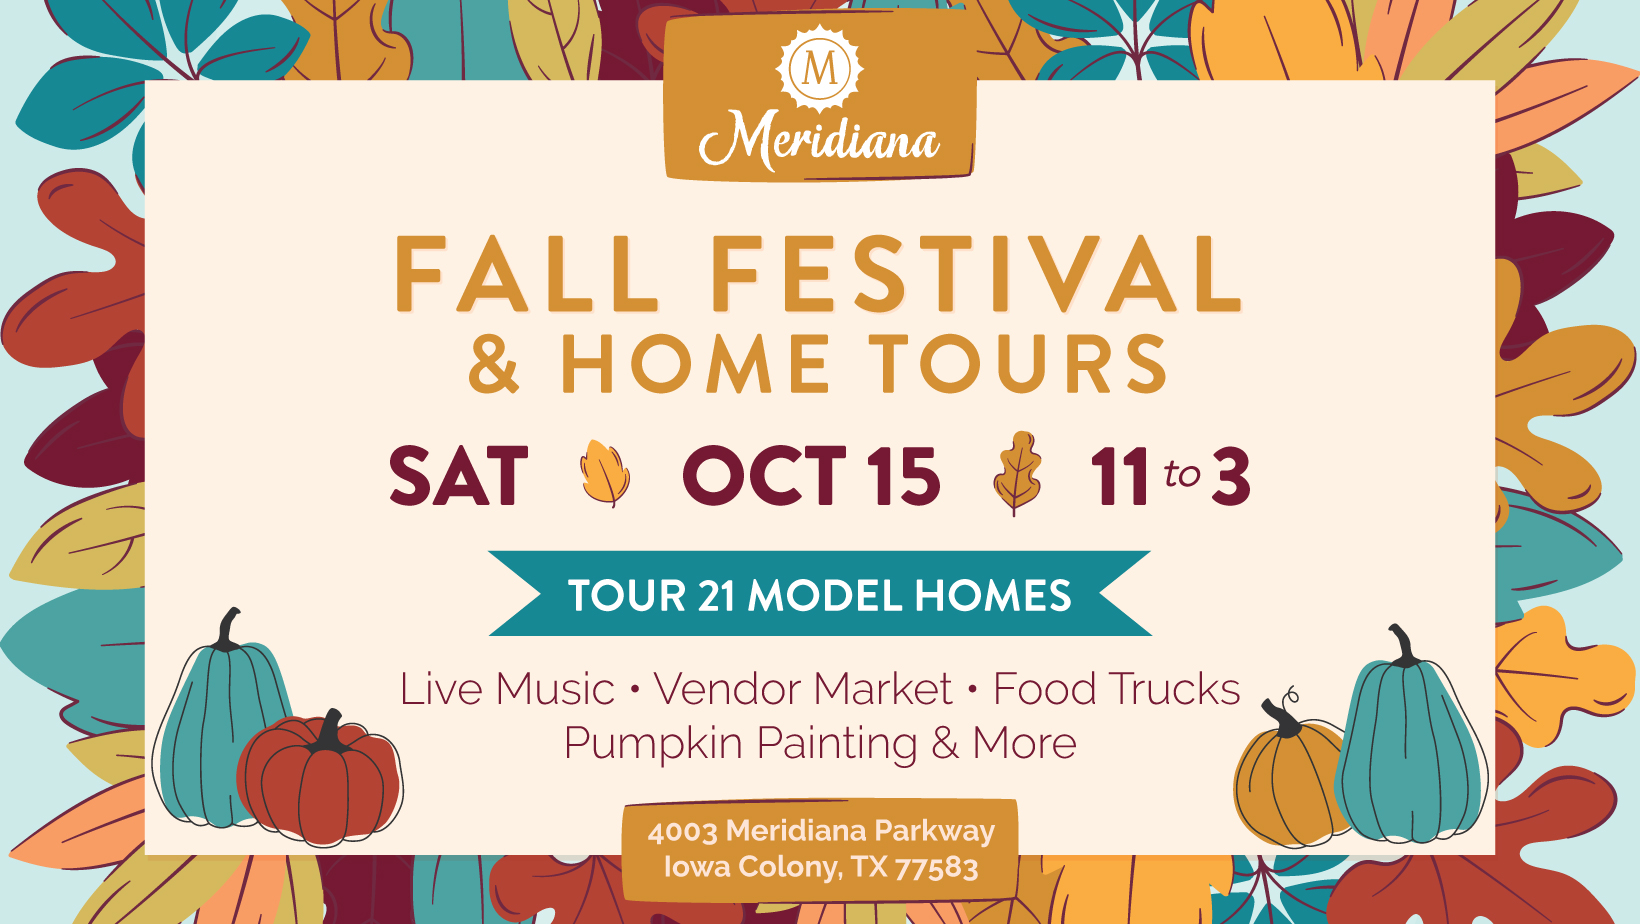 Meridiana Welcomes Change of Season at Fall Festival & Home Tours Saturday, October 15